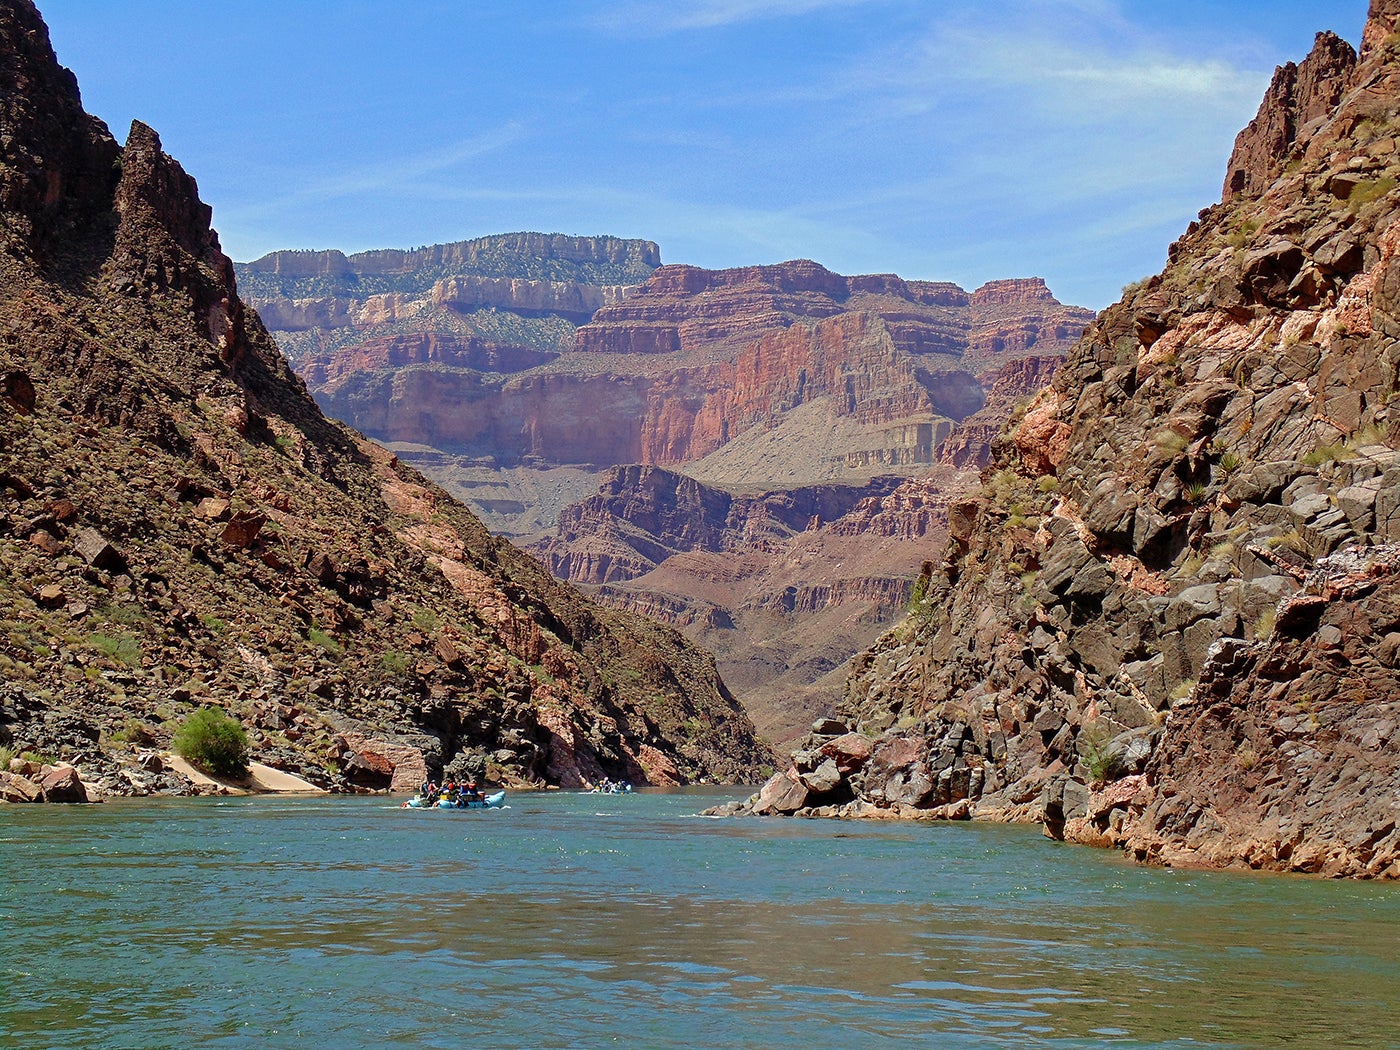 Geological research expedition on the Colorado River in Grand Canyon National Park, Arizona.